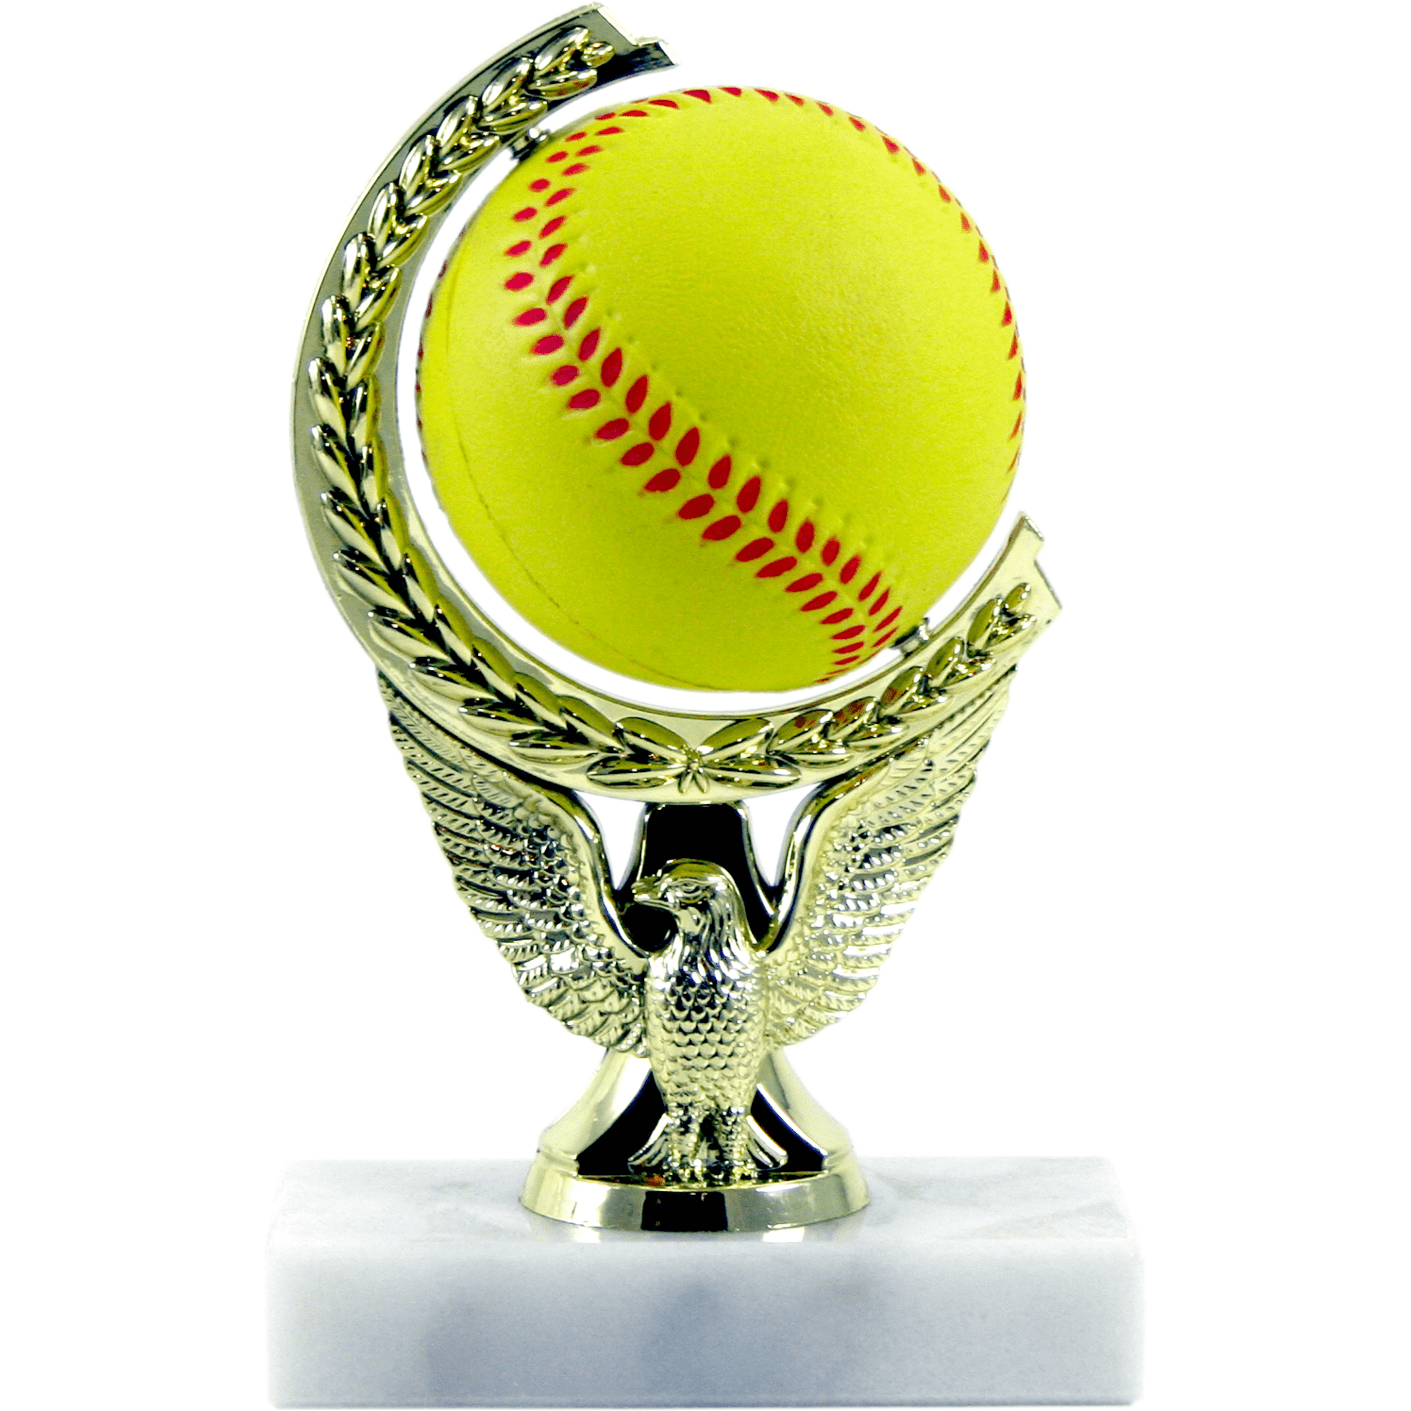 Spinning Squeeze Sports Ball Trophy | Alliance Awards LLC.